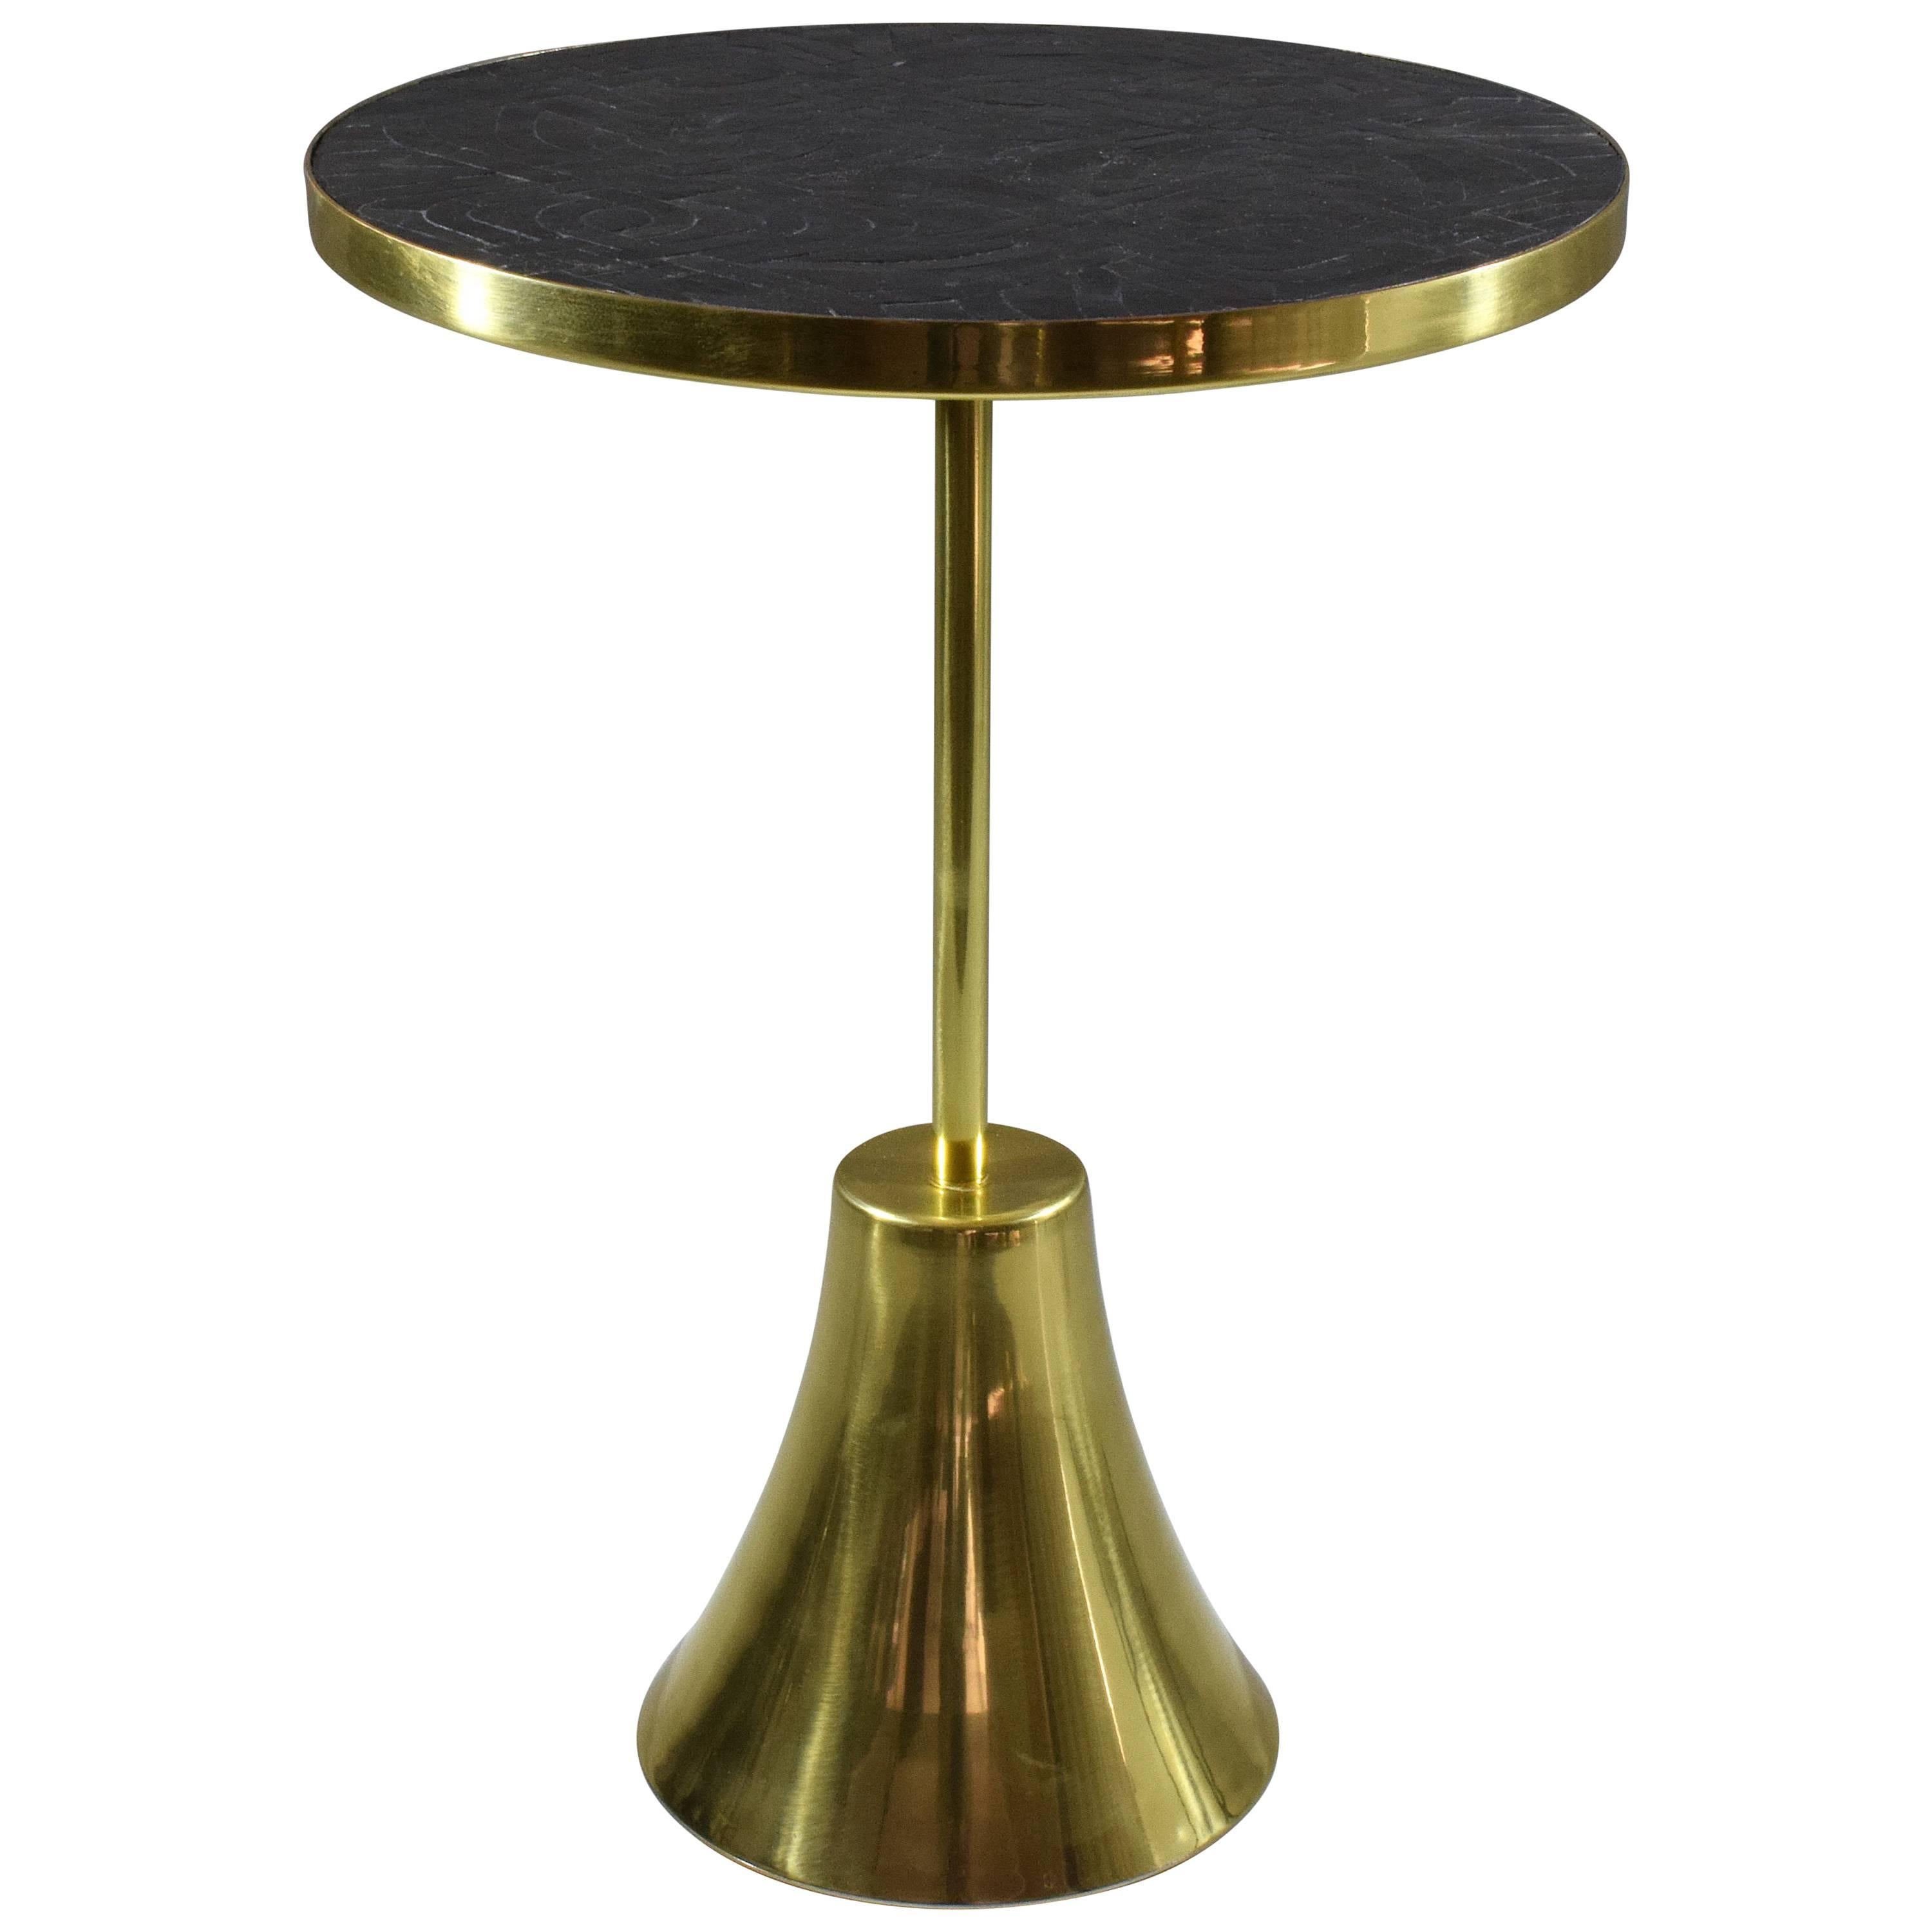 Zel-Ora Contemporary Brass Mosaic Side Table, Flow Collection For Sale